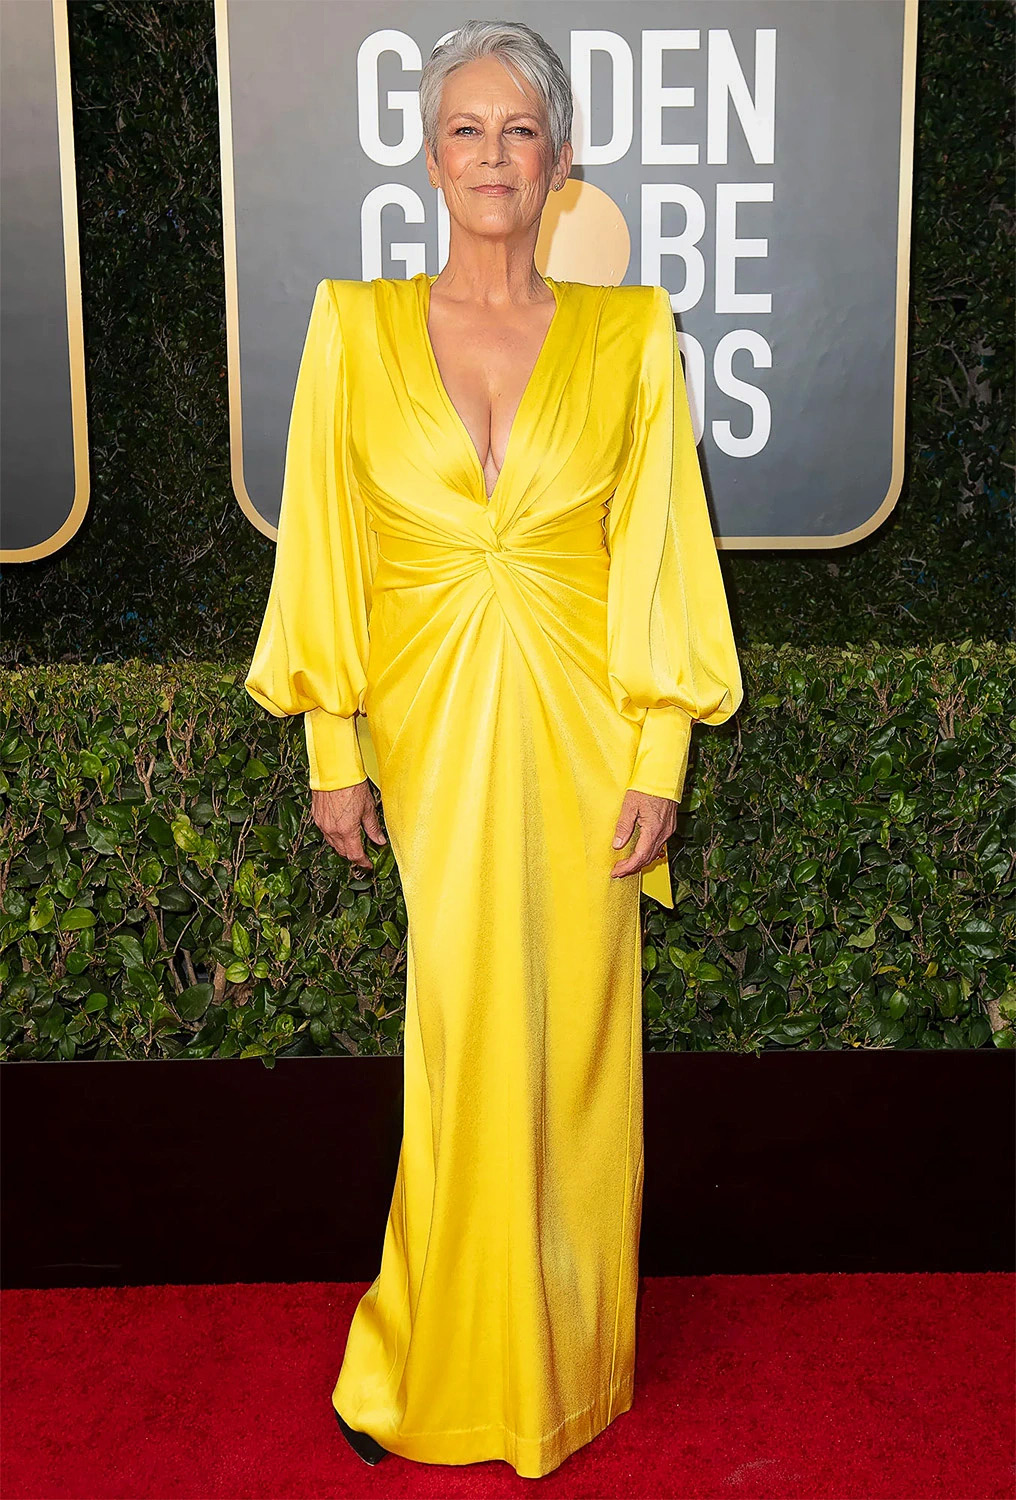 Golden Globes 2023 Red Carpet: See What the Stars Wore thumbnail